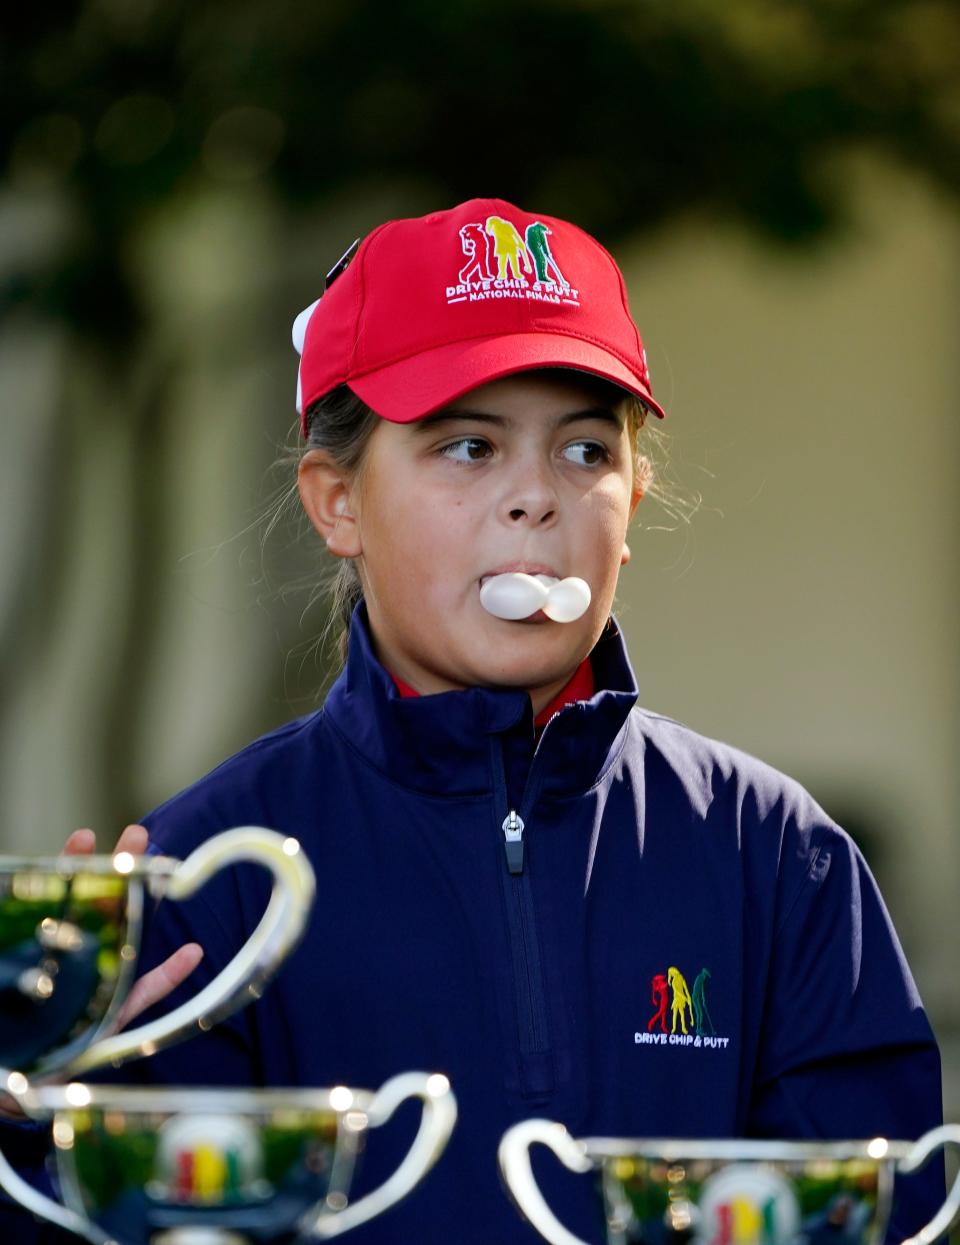 Madleyn Dickeerson blows a bubble during the awards presentations at the Drive, Chip & Putt National Finals competition at Augusta National Golf Club.